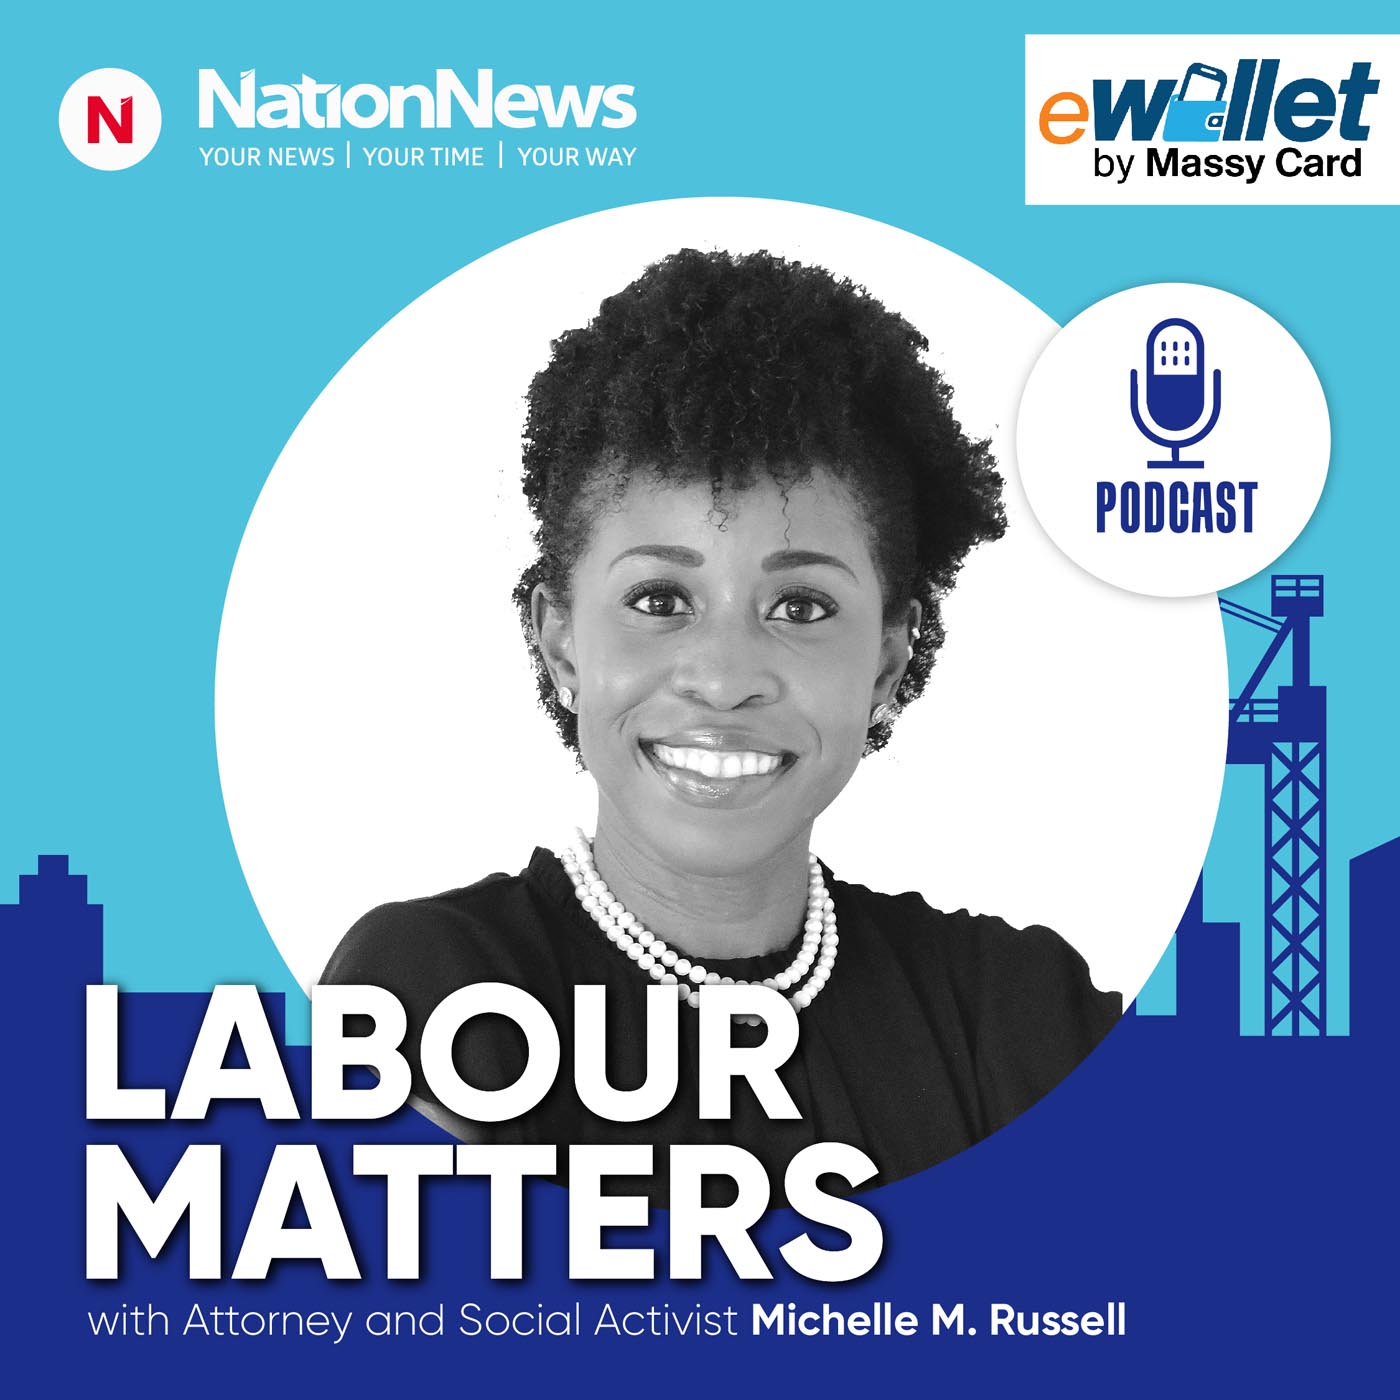 Labour Matters Episode 3: Teachers deserve holiday too